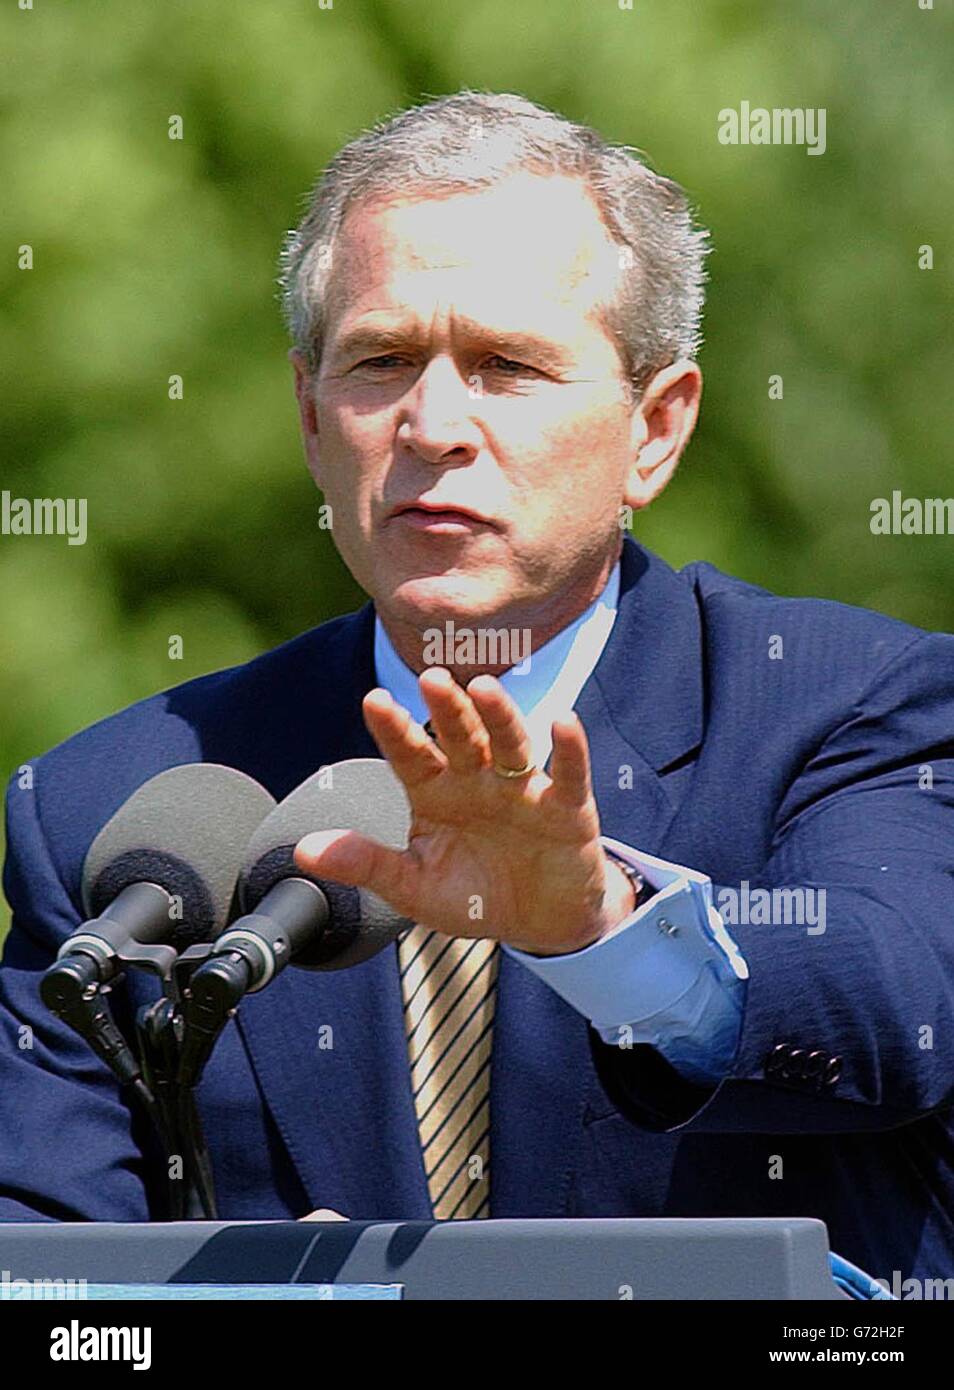 US President George Bush attends the press conference at Dromoland Castle, Co Clare, Republic of Ireland, after his meeting with EU leaders. Stock Photo